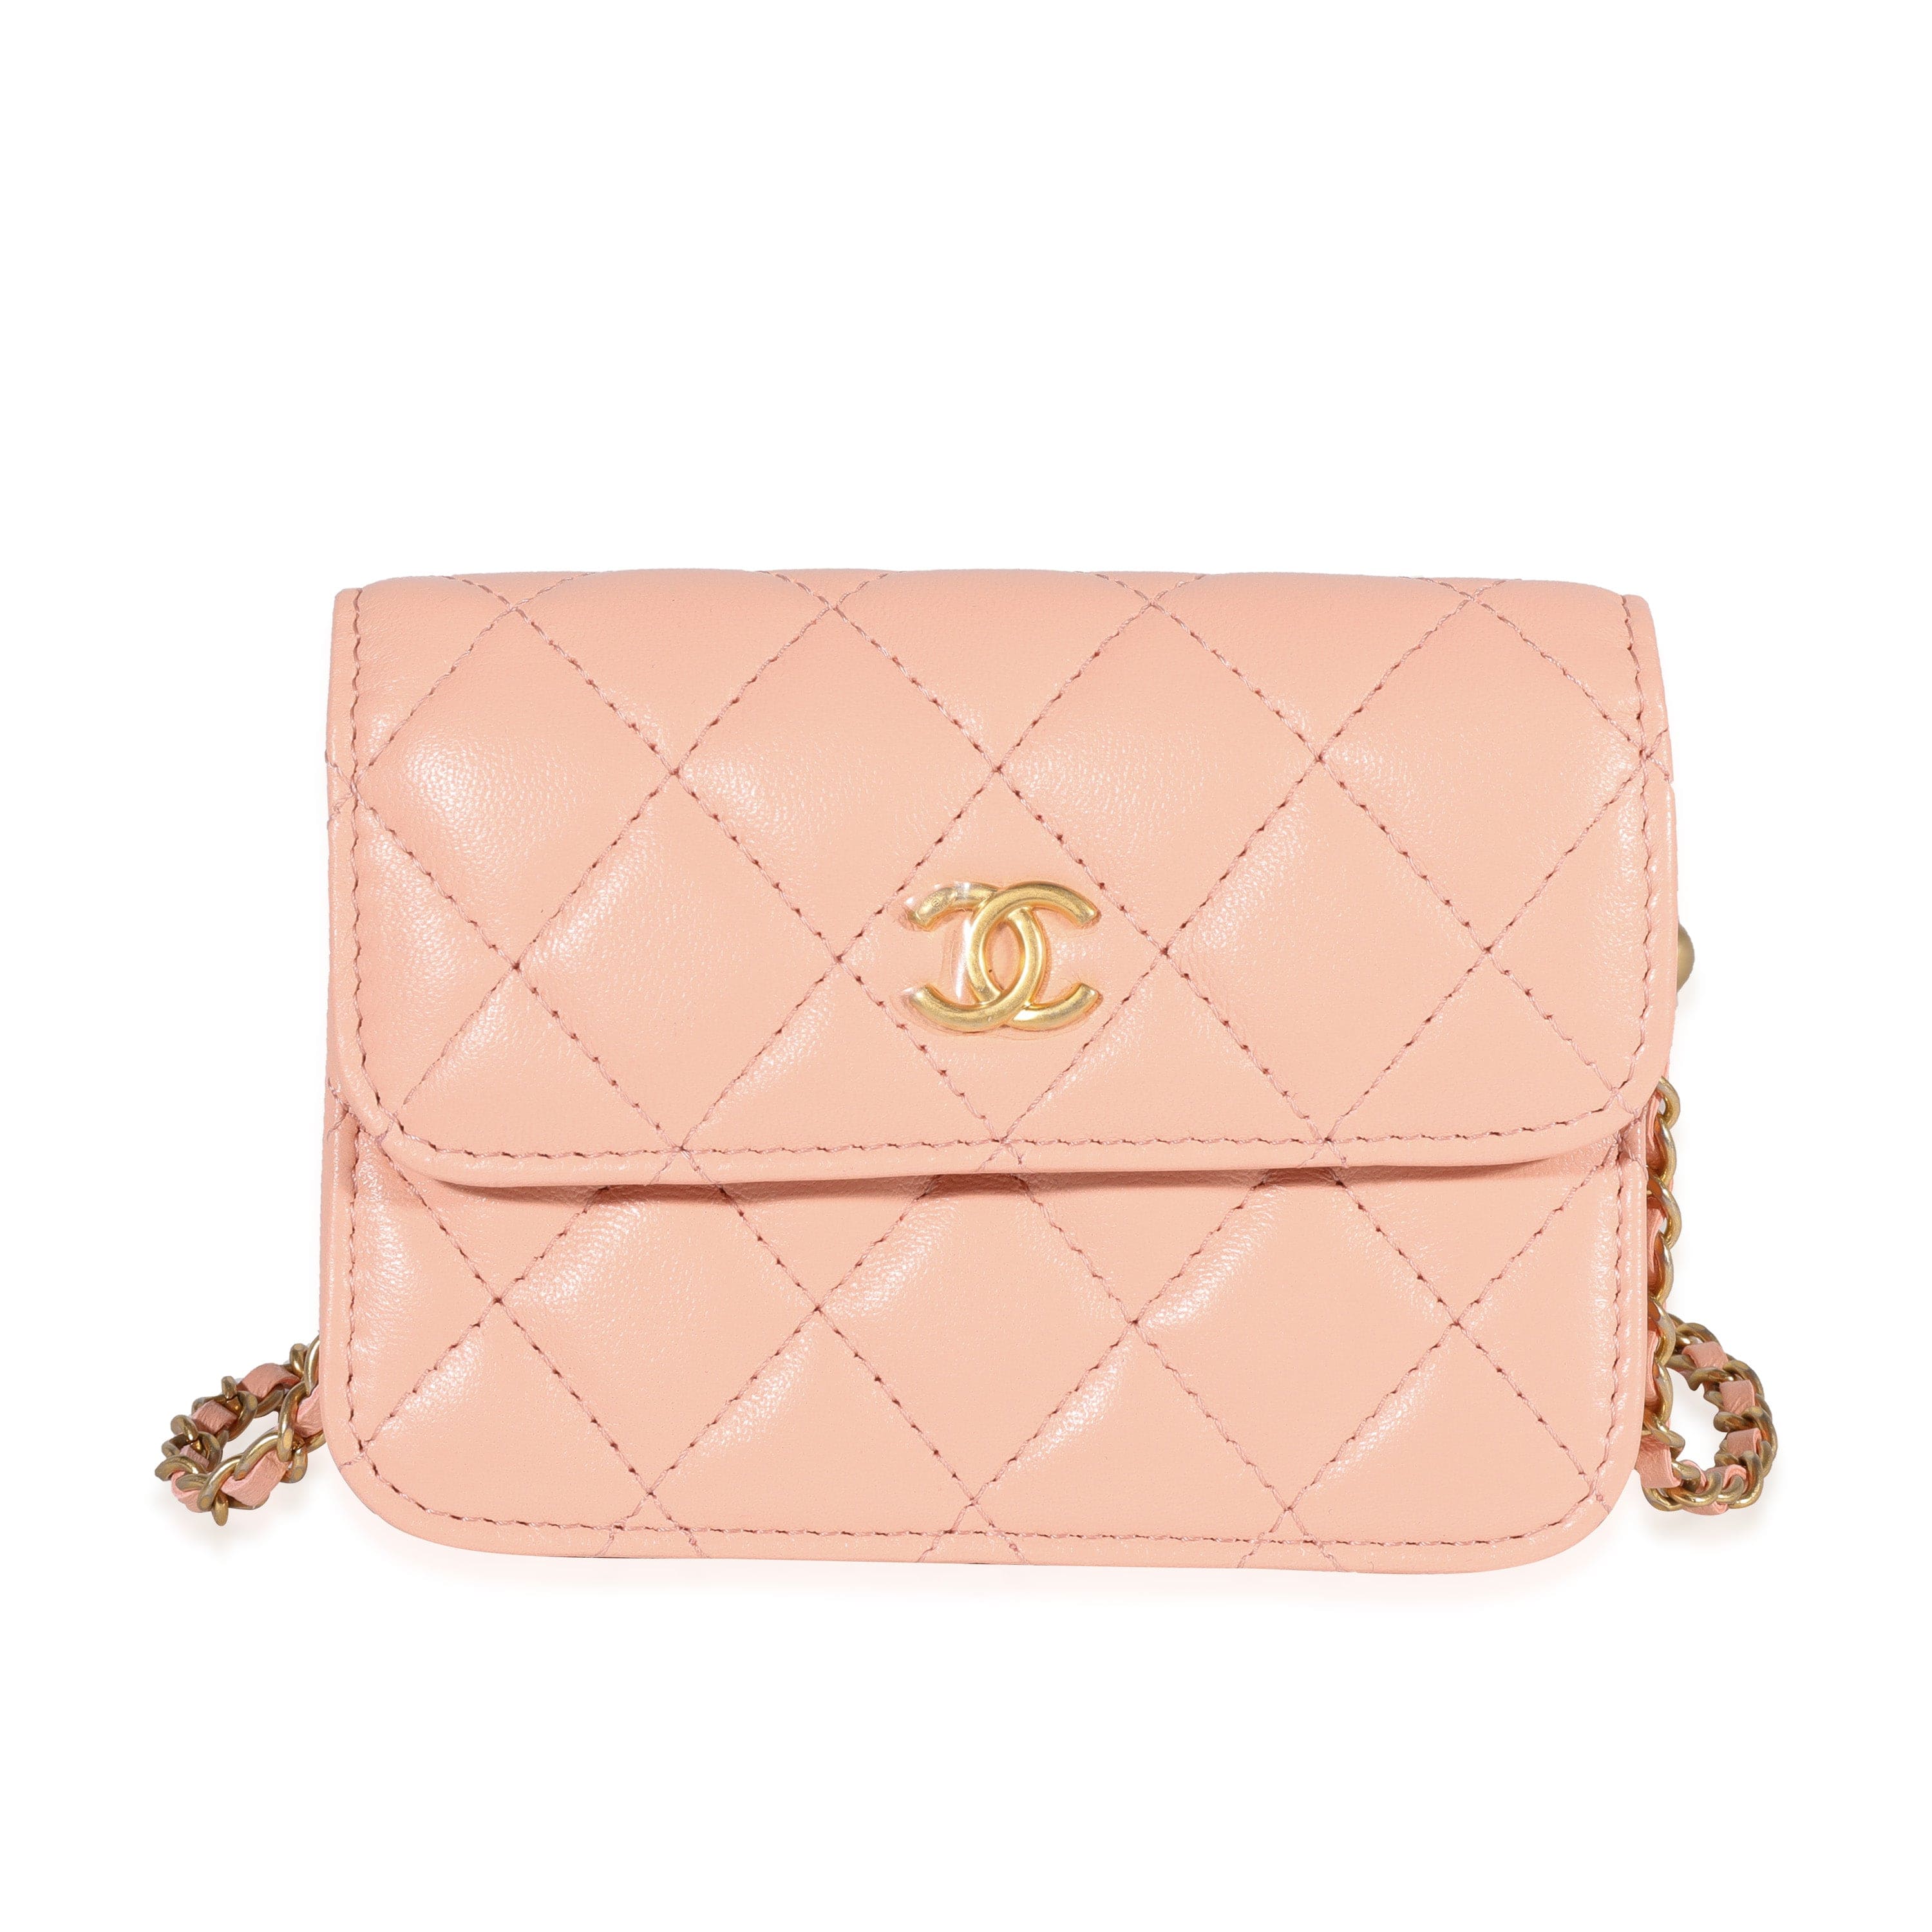 Chanel Chanel Light Orange Quilted Lambskin Pearl Crush Clutch